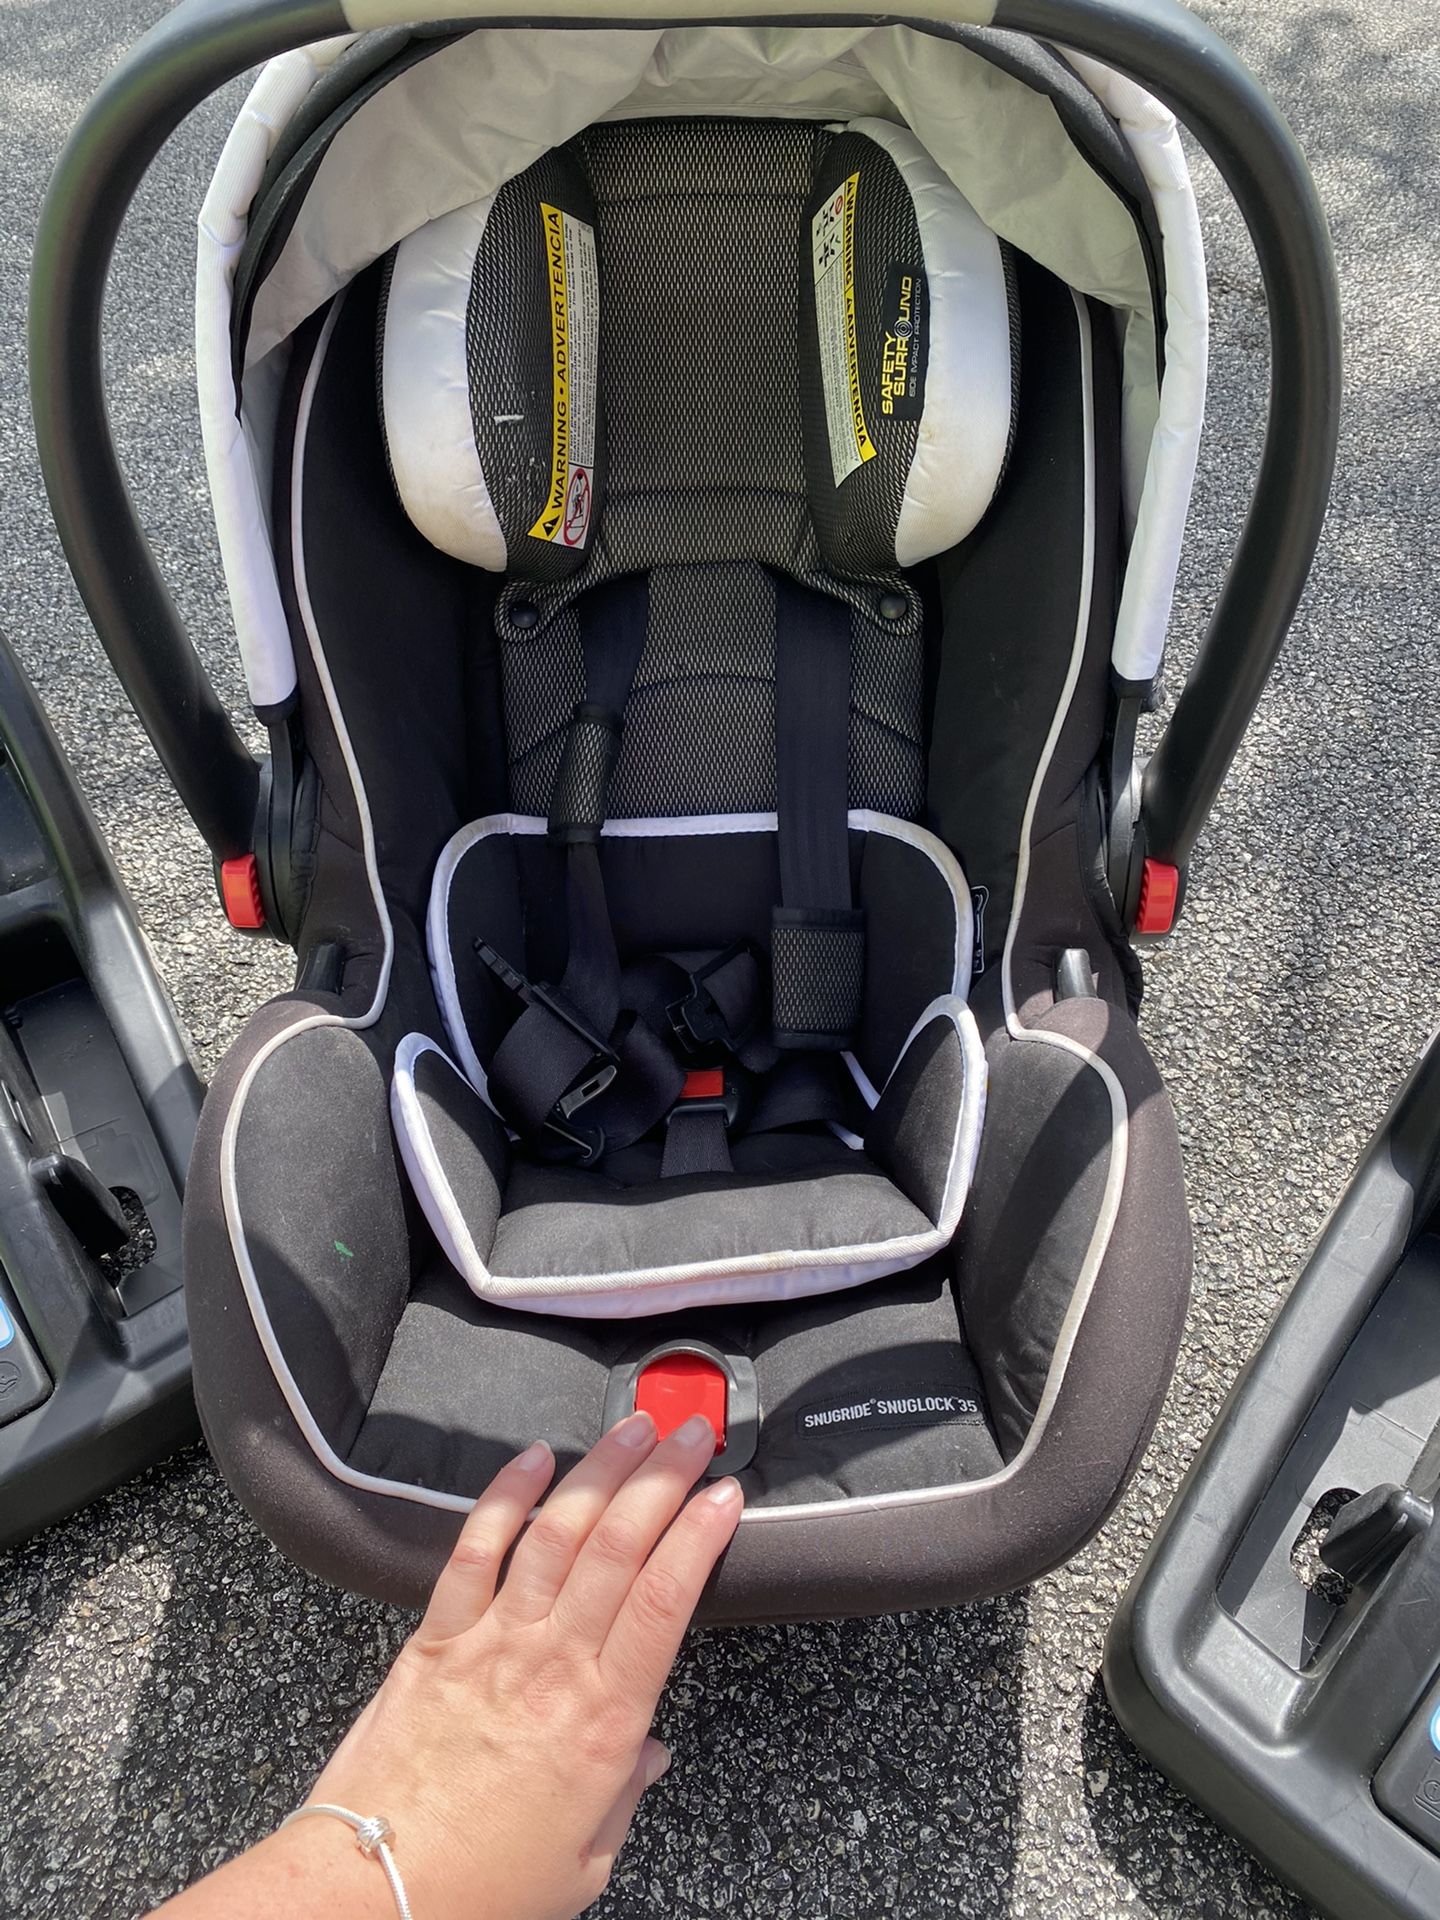 Snugride Snuglock 35 car seat with two bases